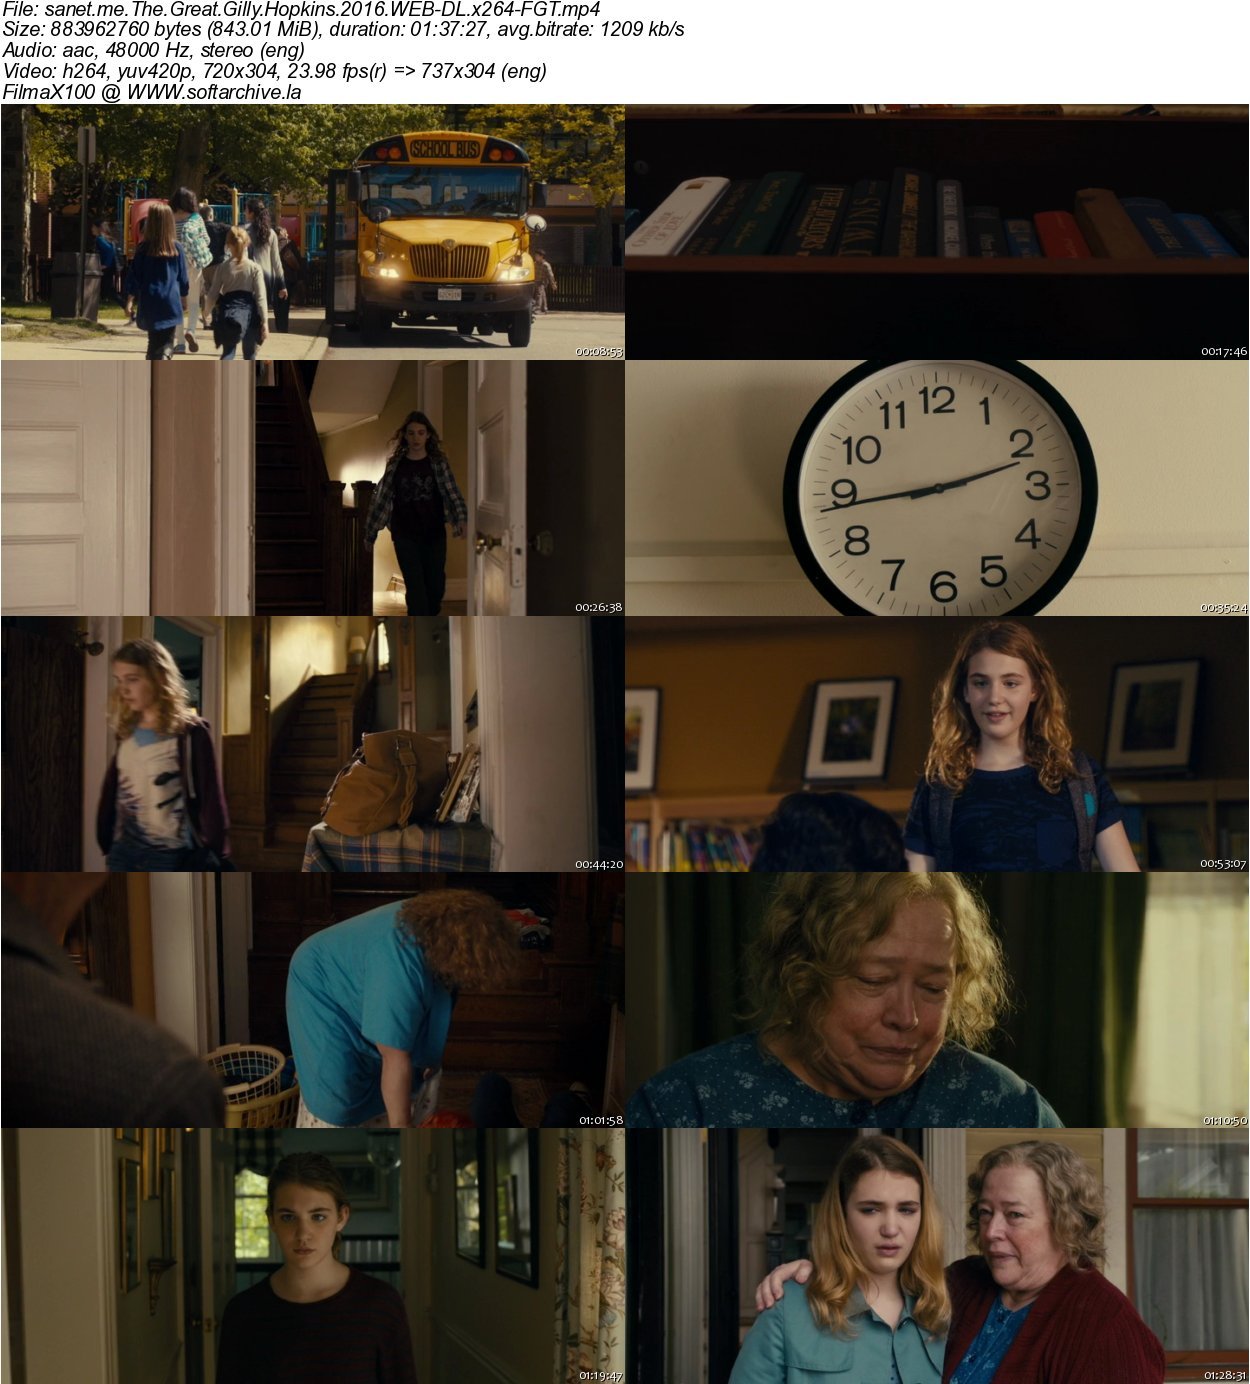 Download The Great Gilly Hopkins 2016 WEB-DL x264-FGT - SoftArchive